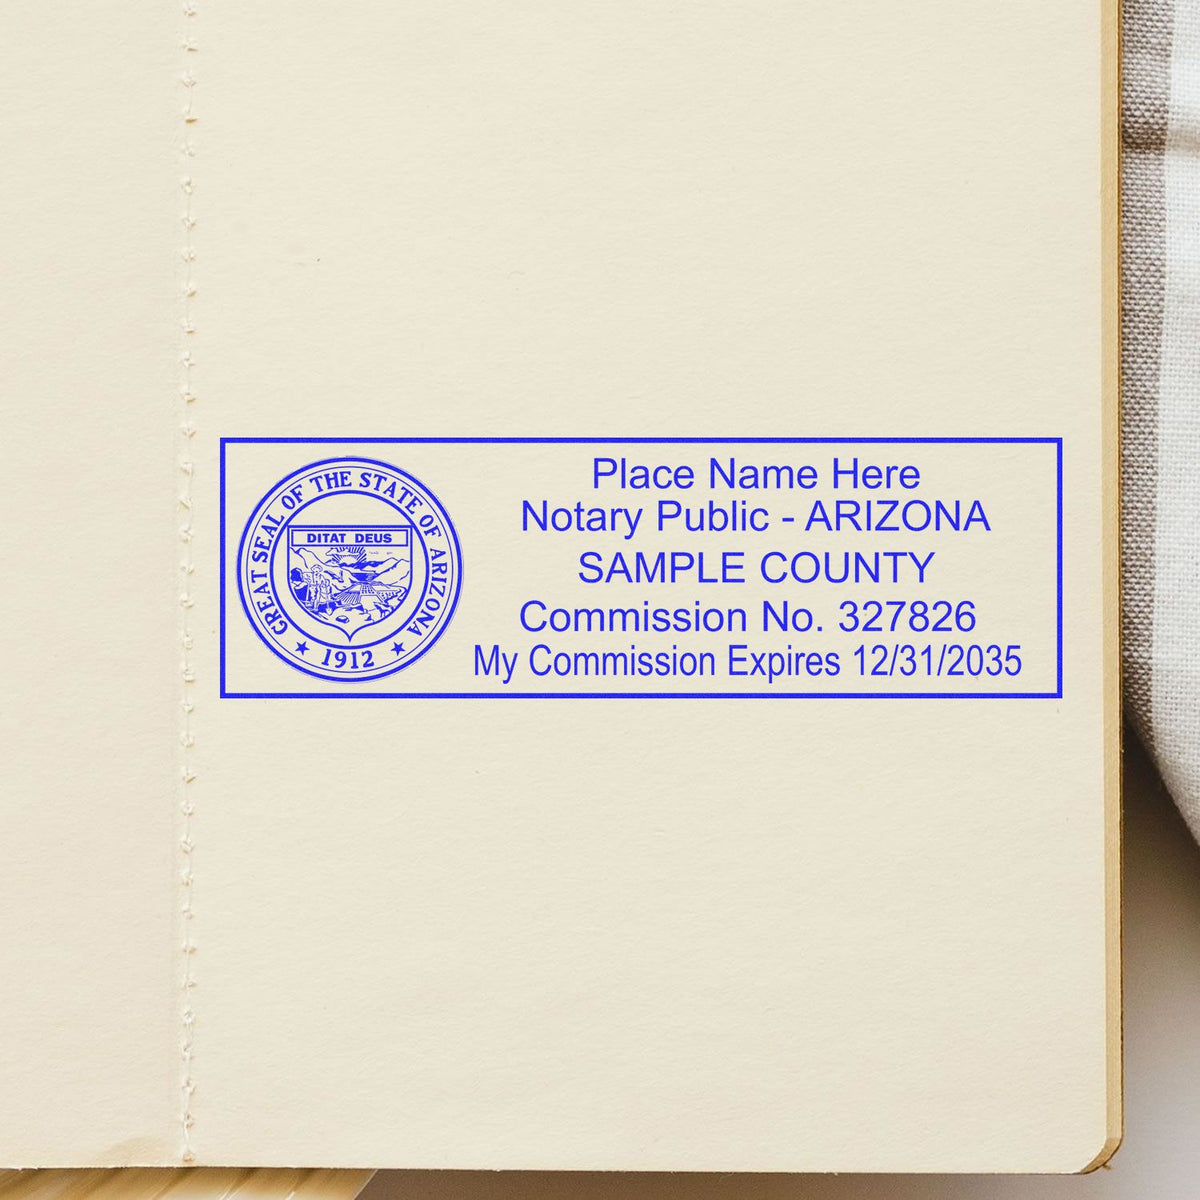 A photograph of the Heavy-Duty Arizona Rectangular Notary Stamp stamp impression reveals a vivid, professional image of the on paper.